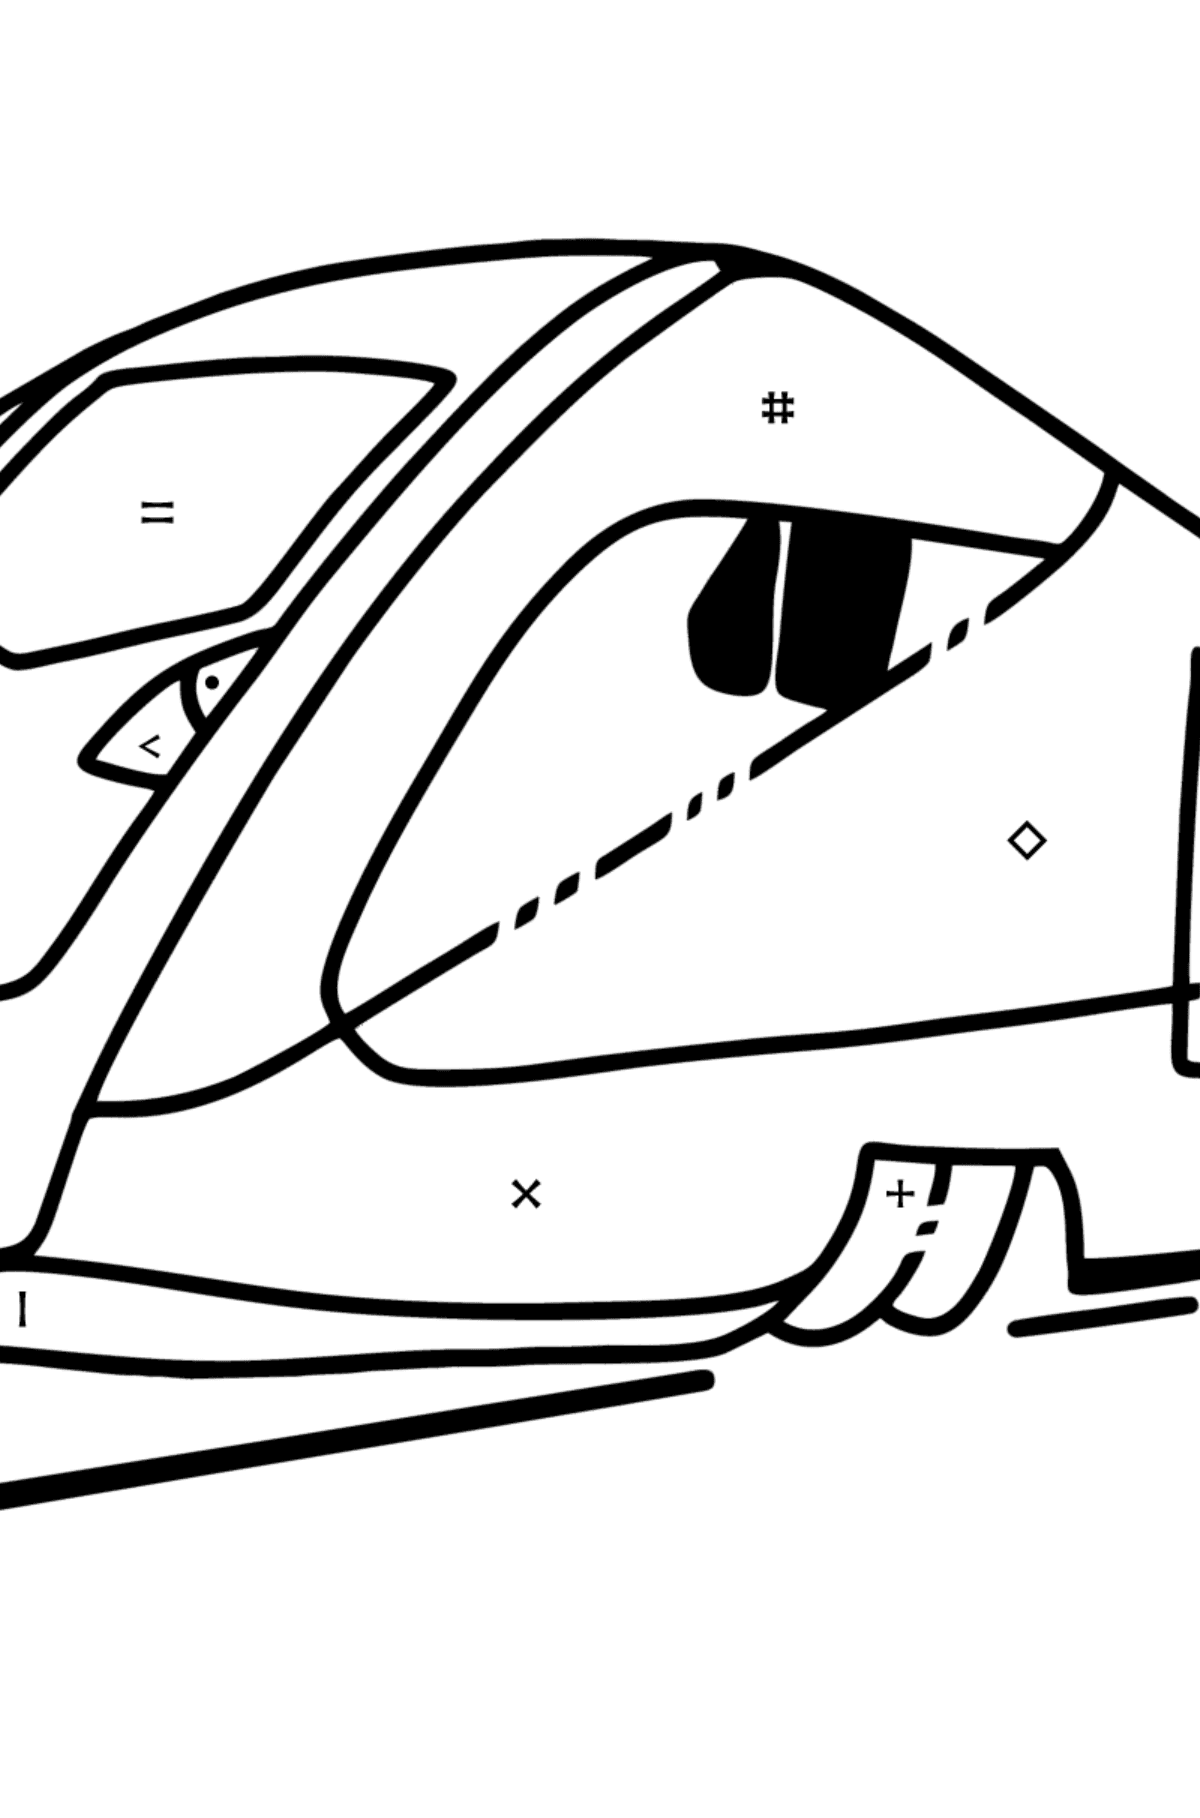 Train coloring page for children - Coloring by Symbols for Kids